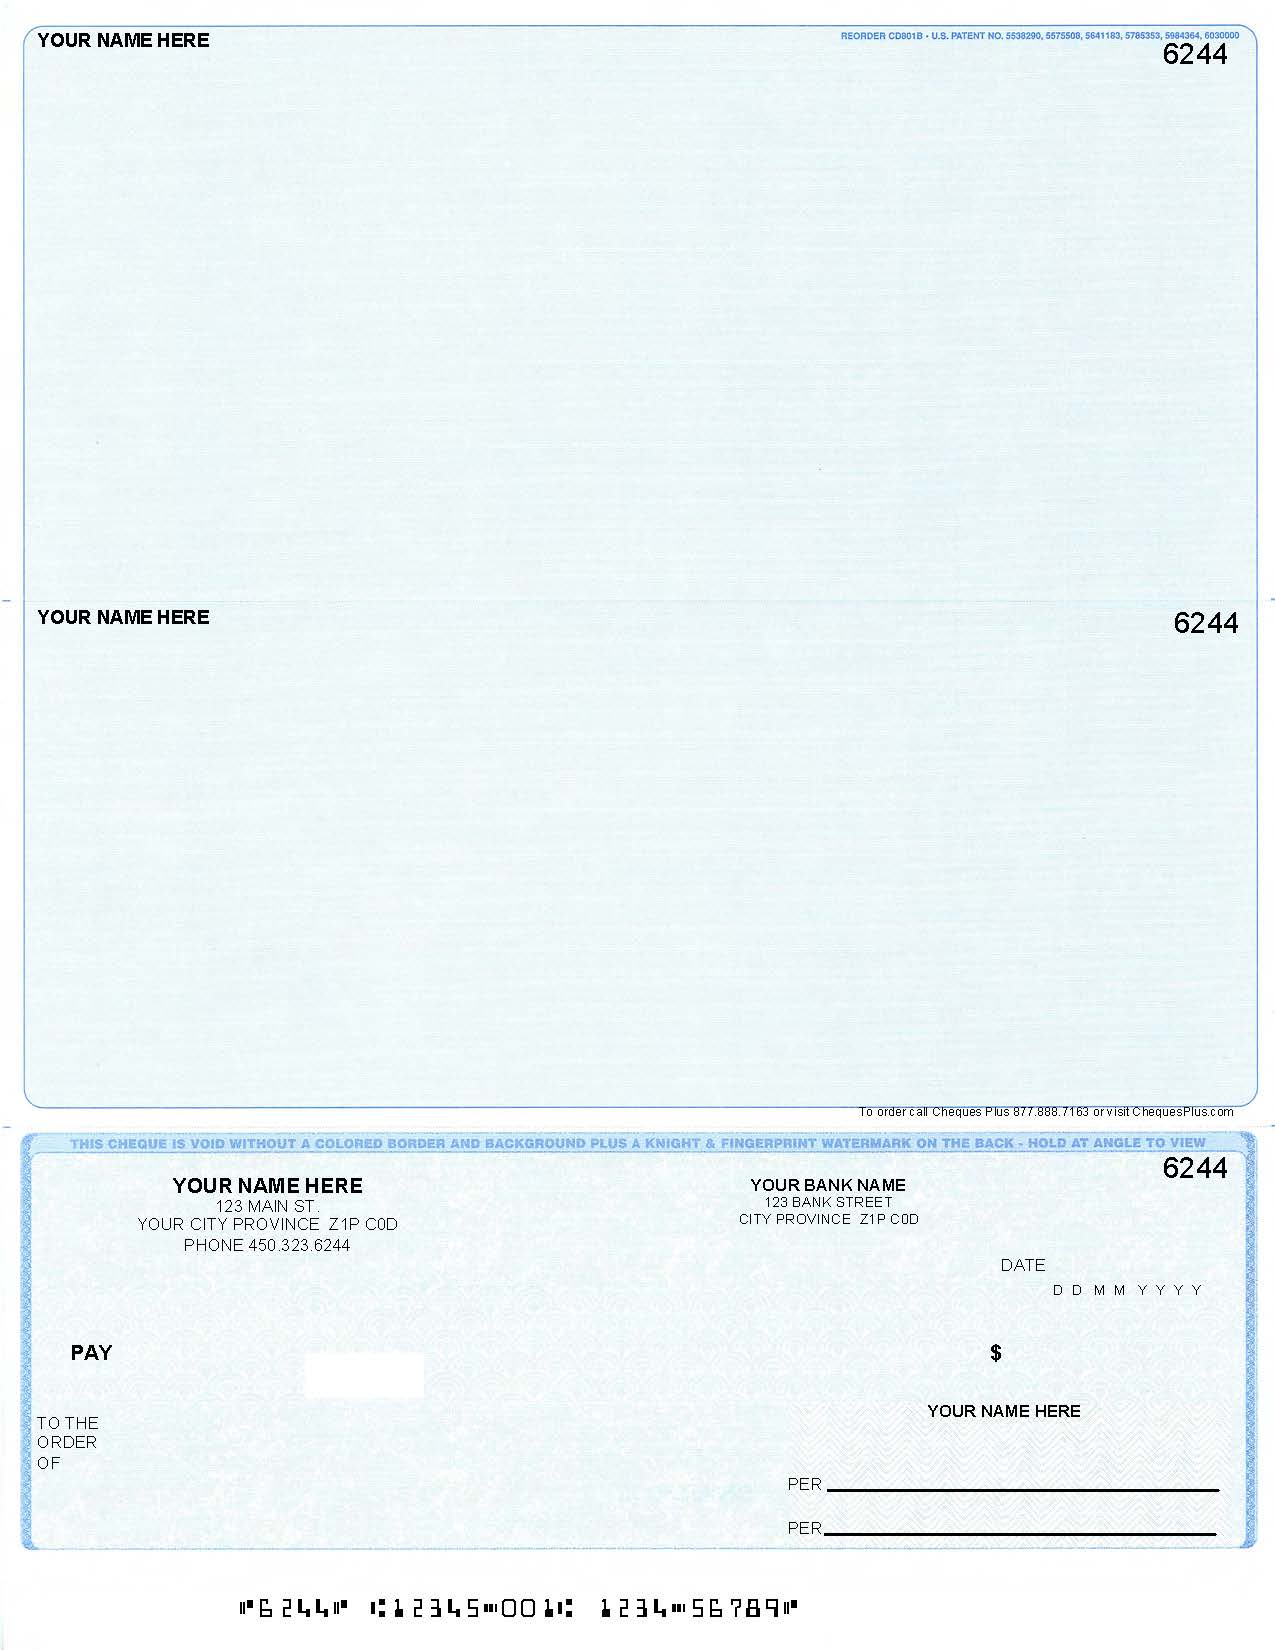 Computer Cheque On Bottom